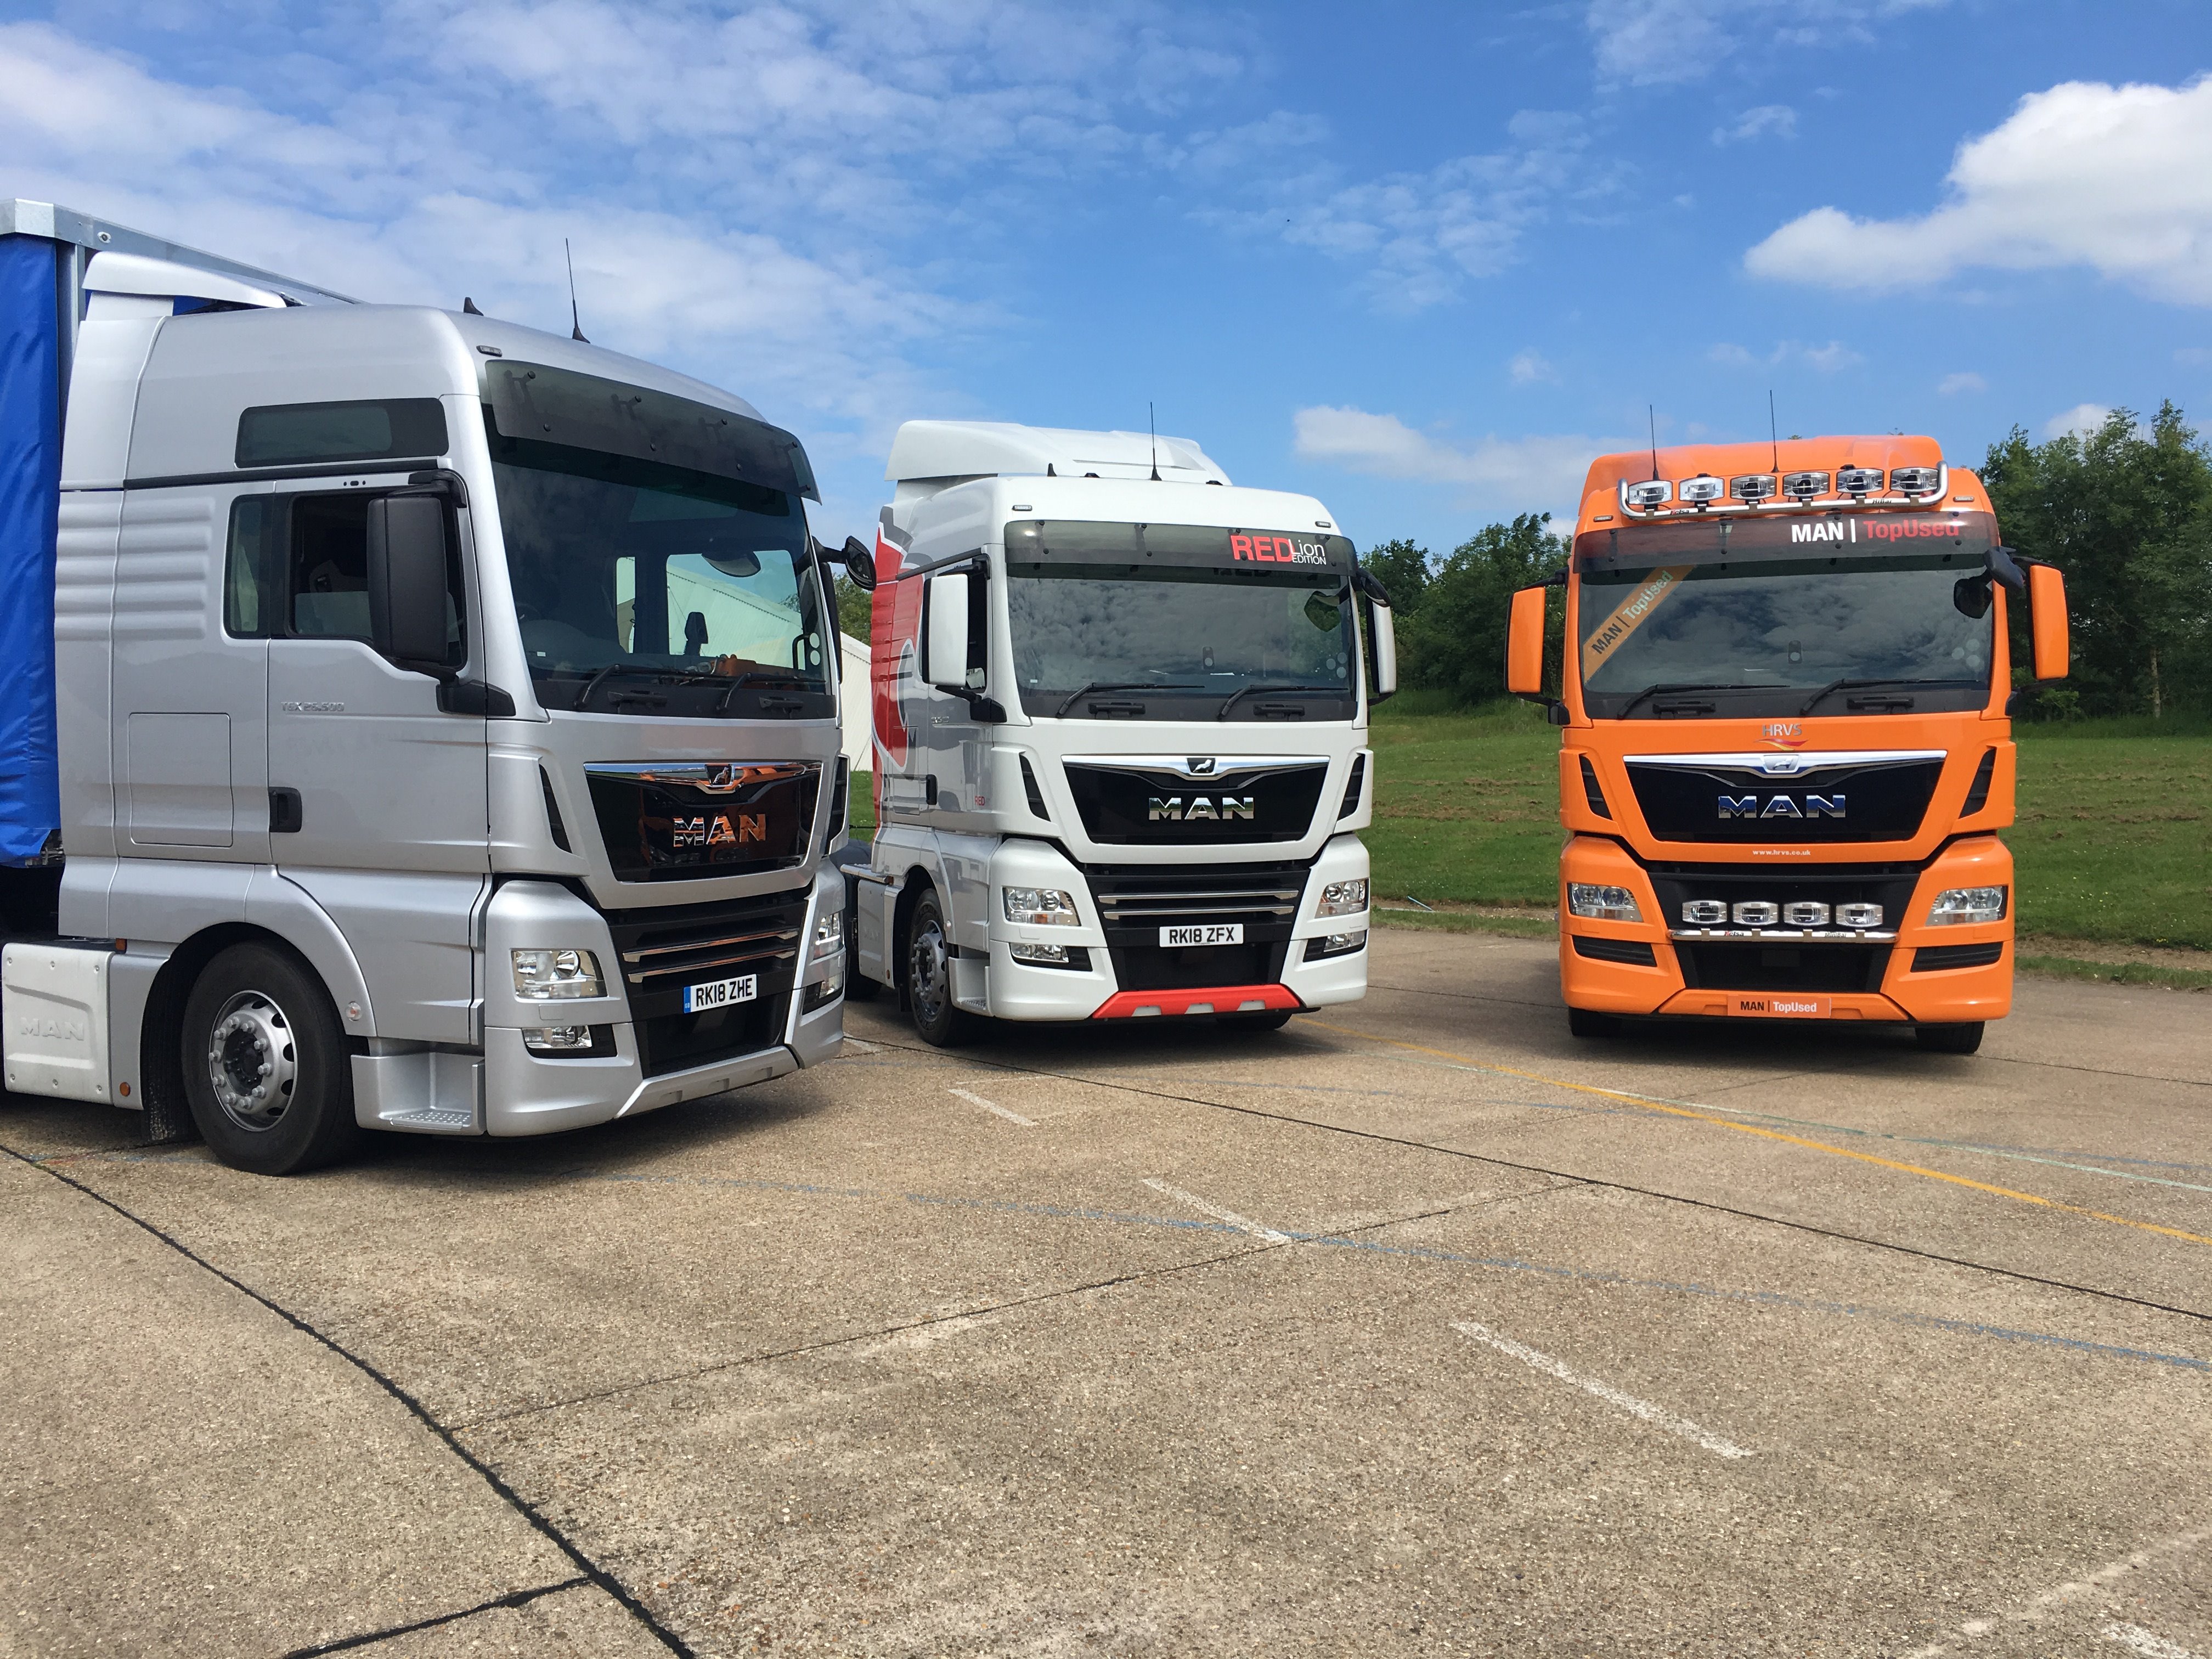 lustre hage varsel MAN Truck & Bus UK on Twitter: "A pride of MAN Lions seen at the MAN Truck  &amp; Bus UK Ride and Drive event @mantruckbusuk The TGX in silver is a  26.500,